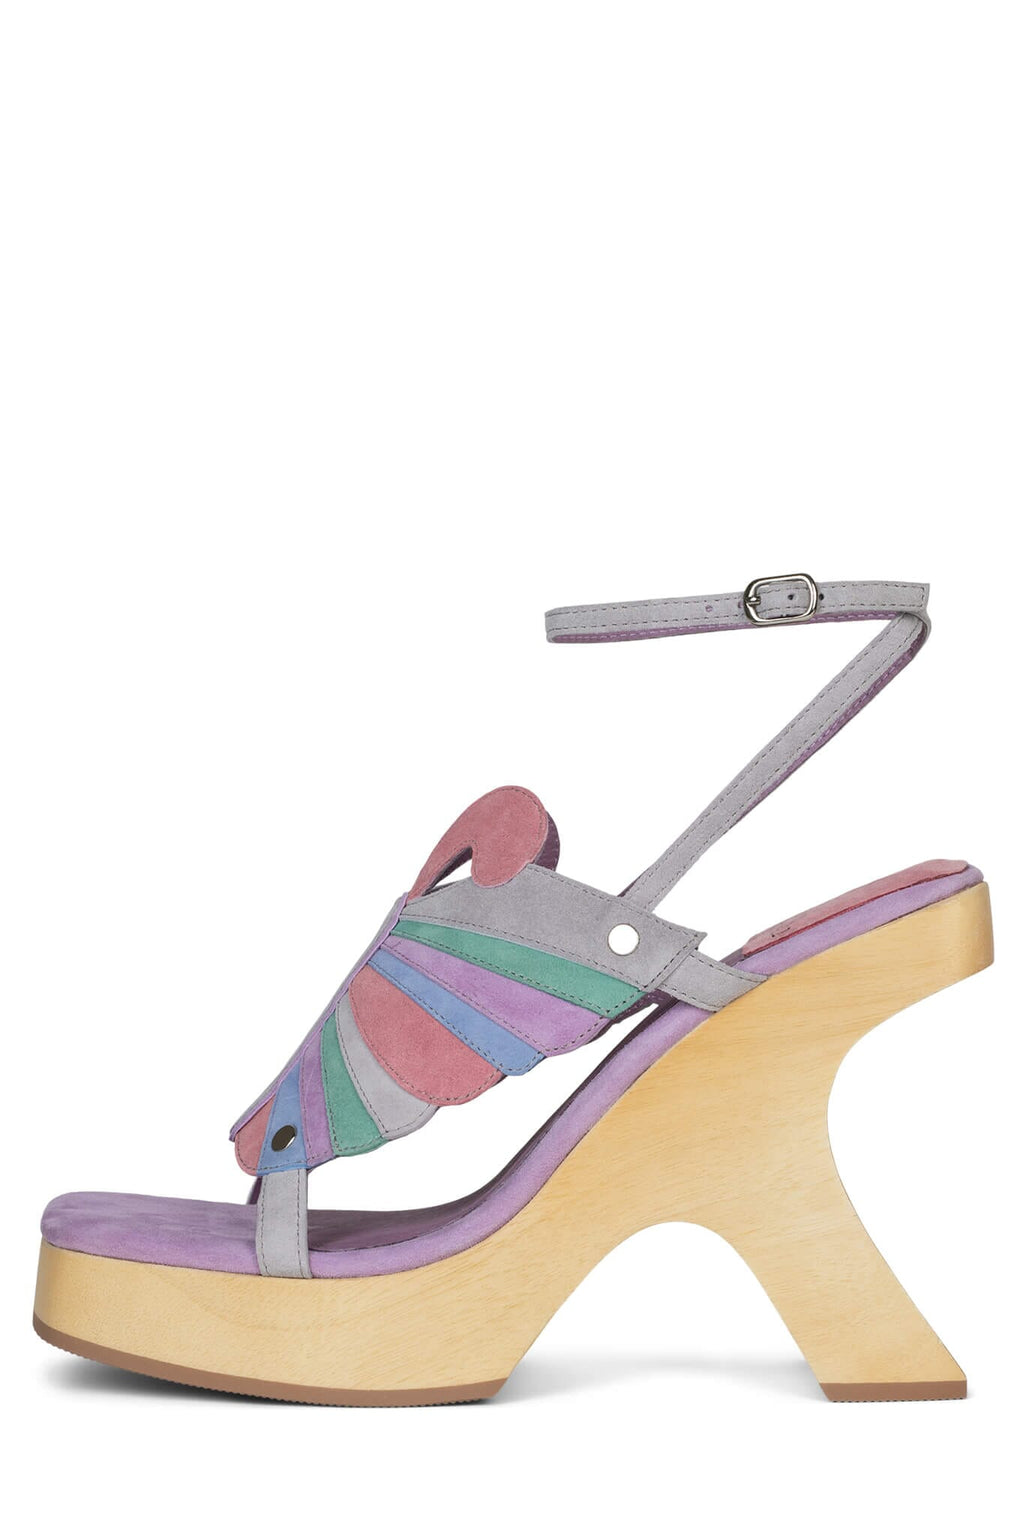 MORPHO Jeffrey Campbell Pink Lilac Suede Multi 6 